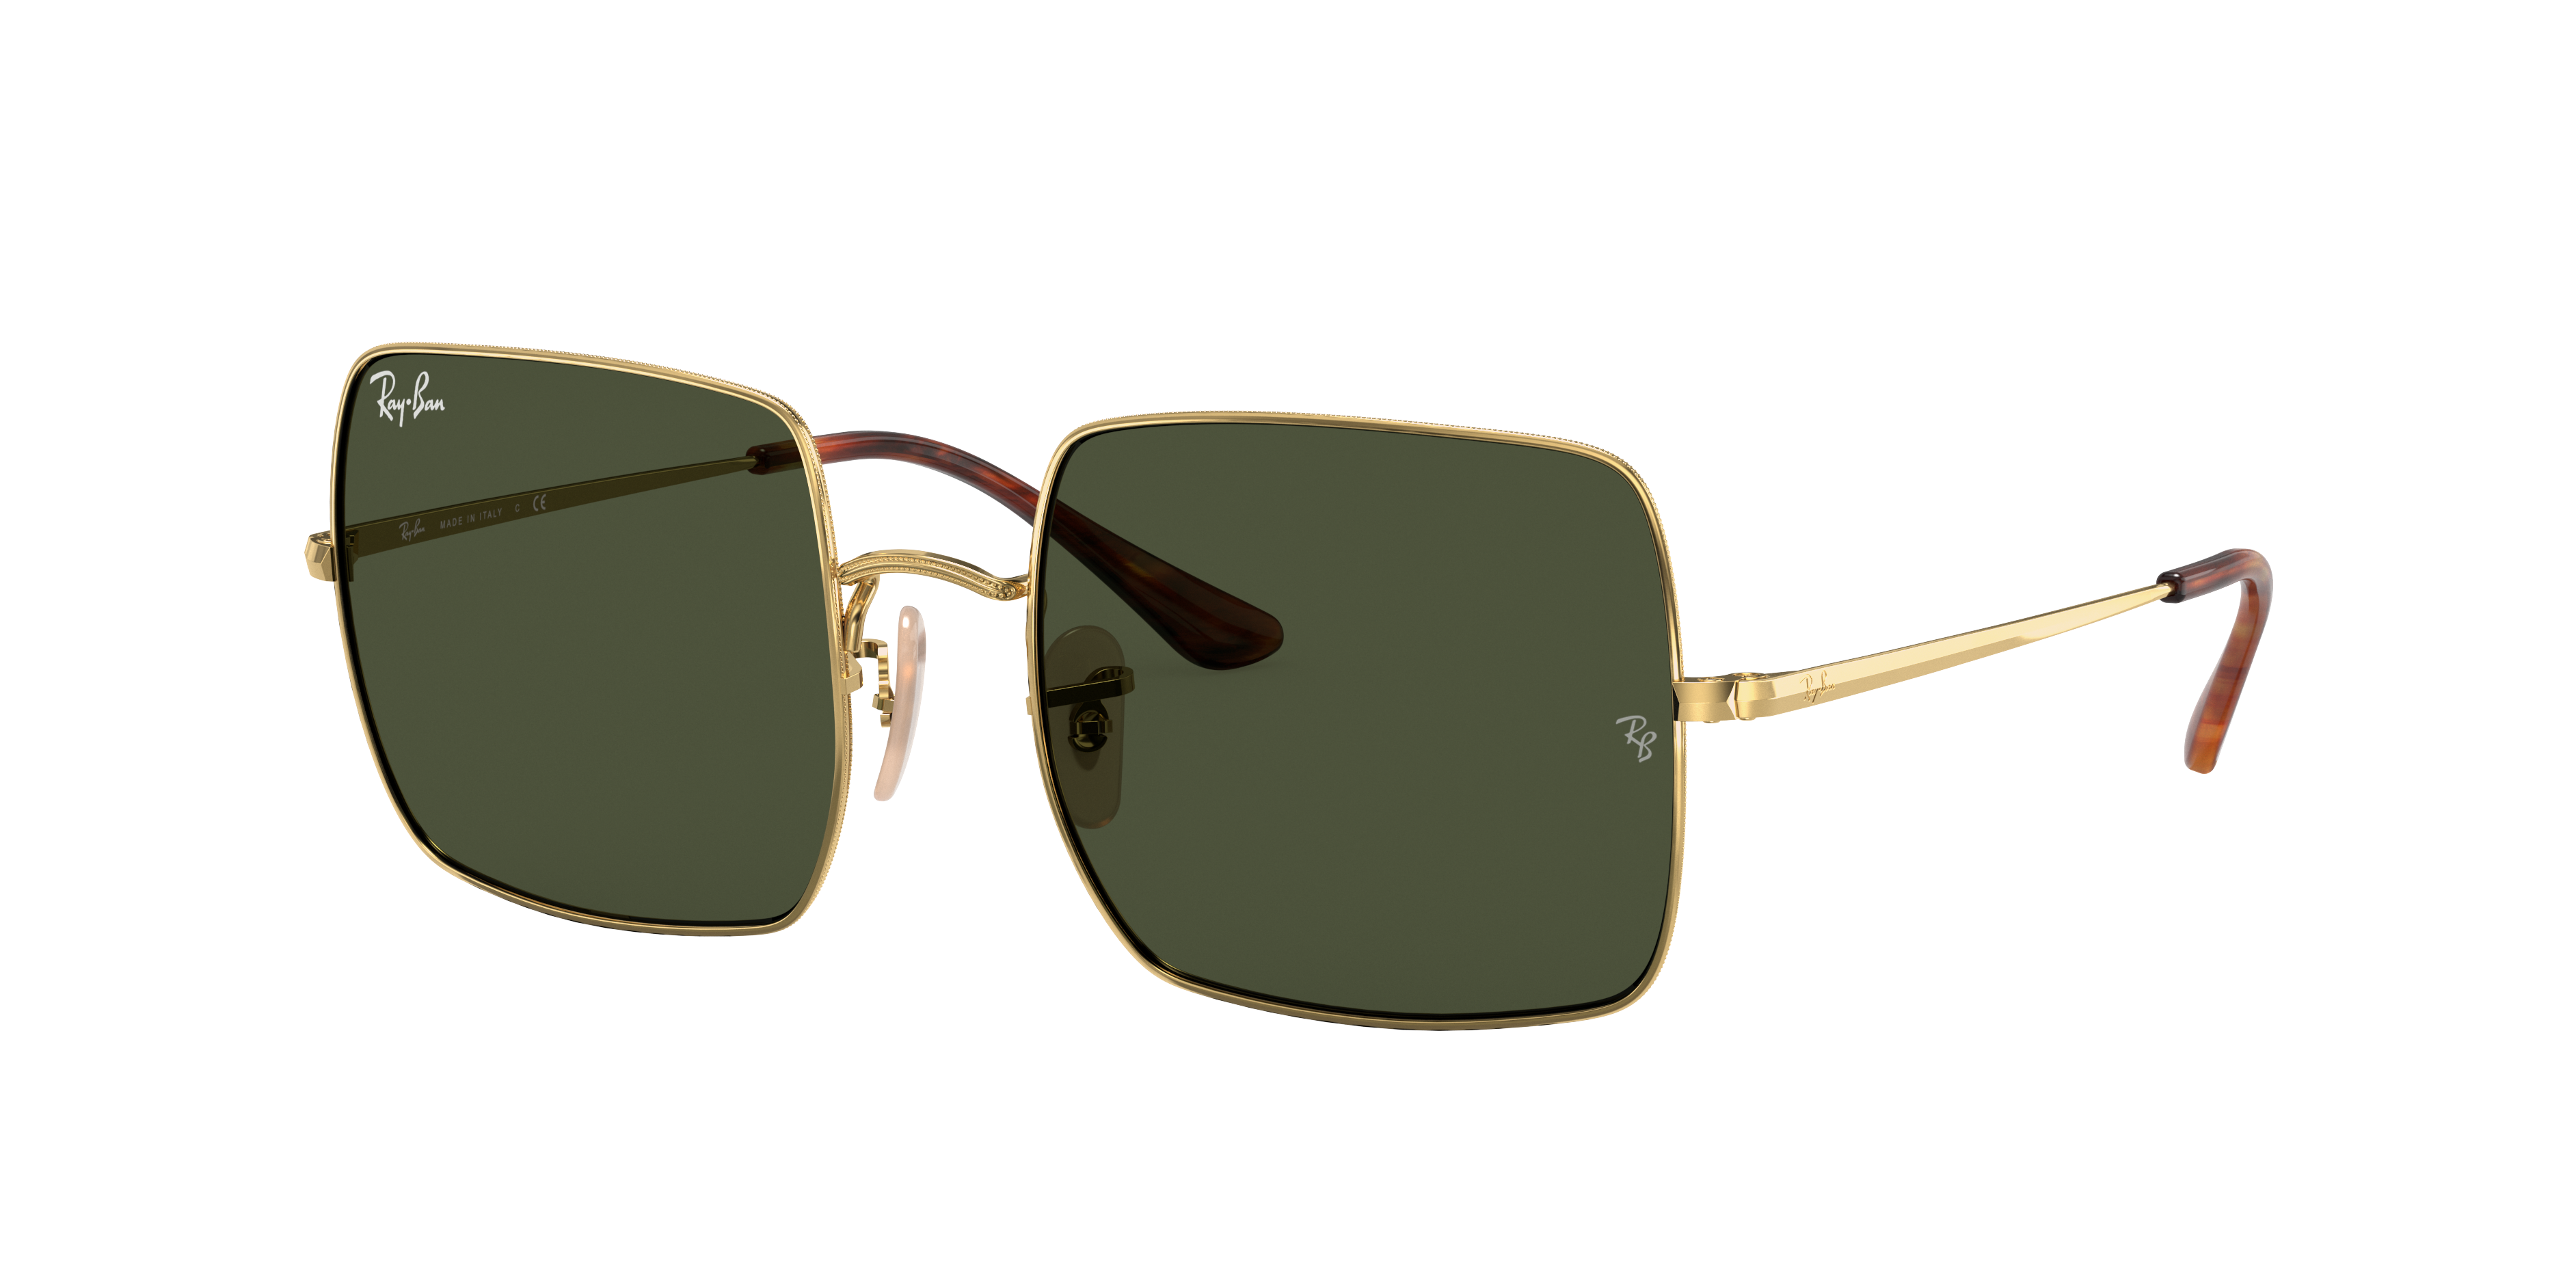 Total 53+ imagen square ray ban glasses